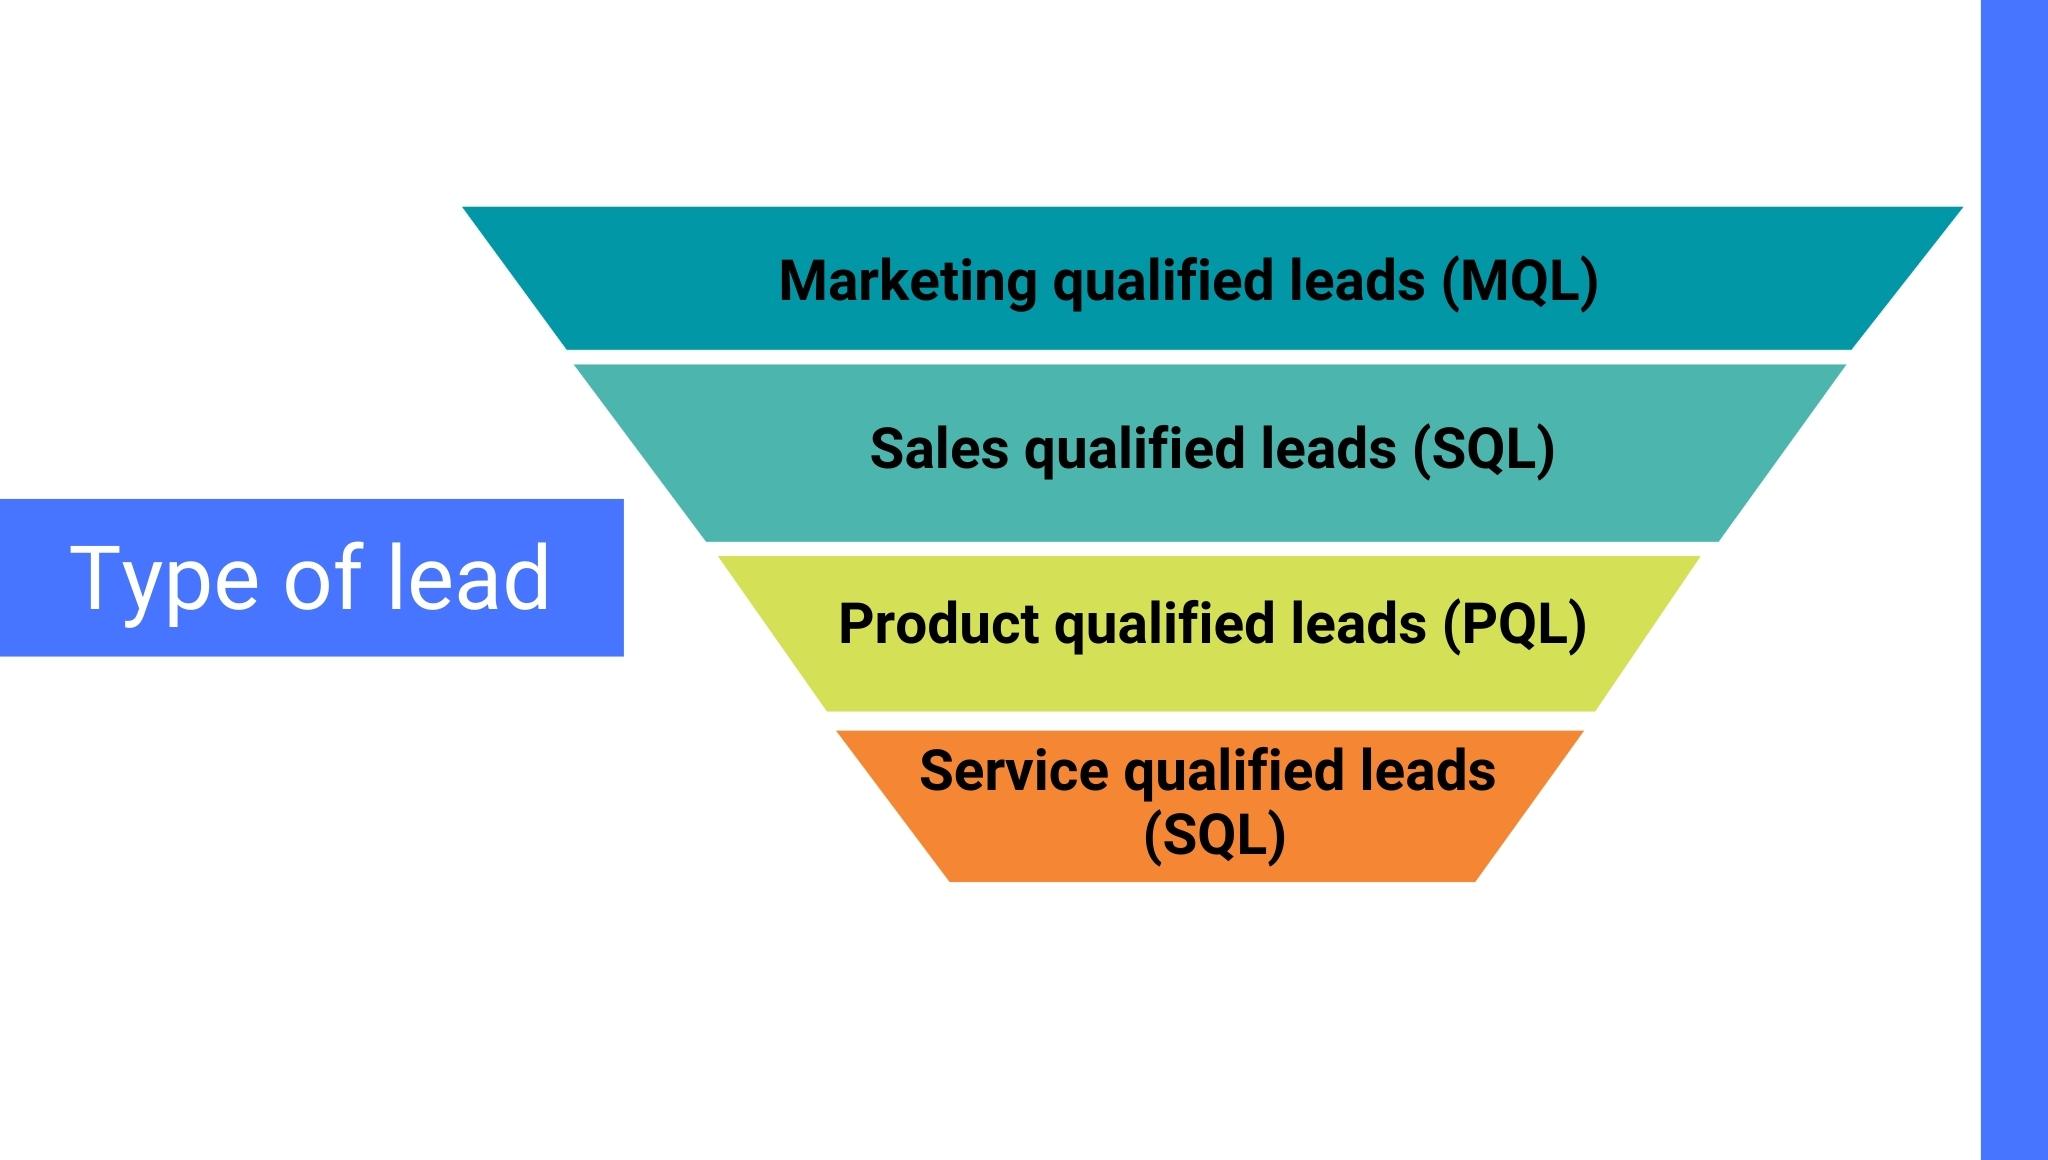 Type of lead